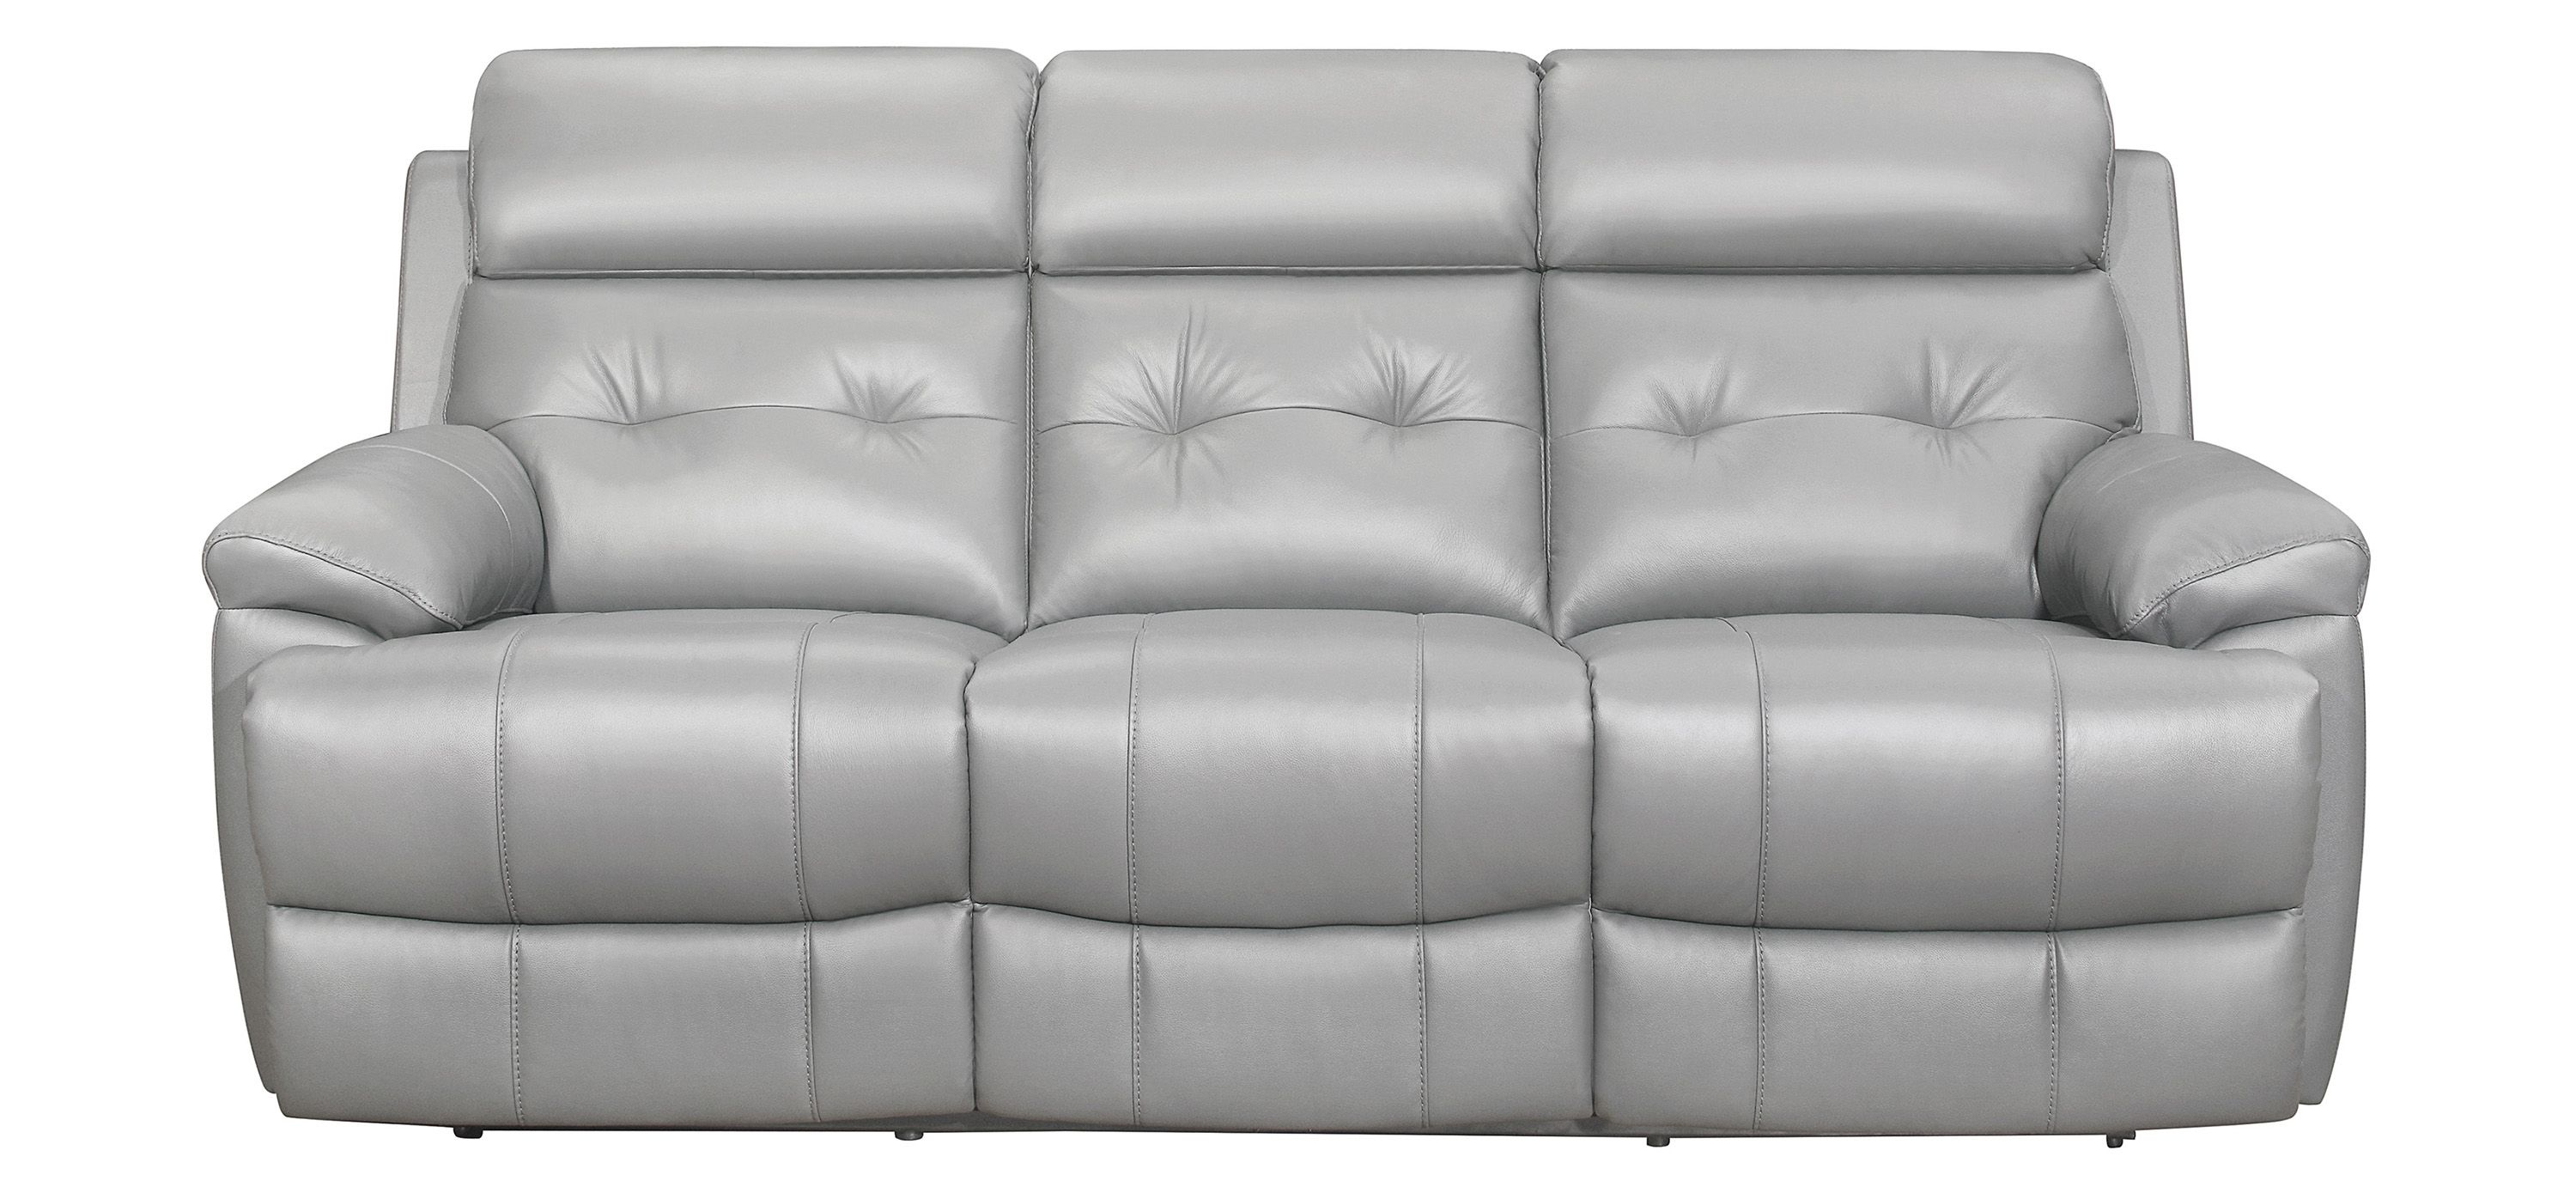 Wallstone Leather Double Reclining Sofa